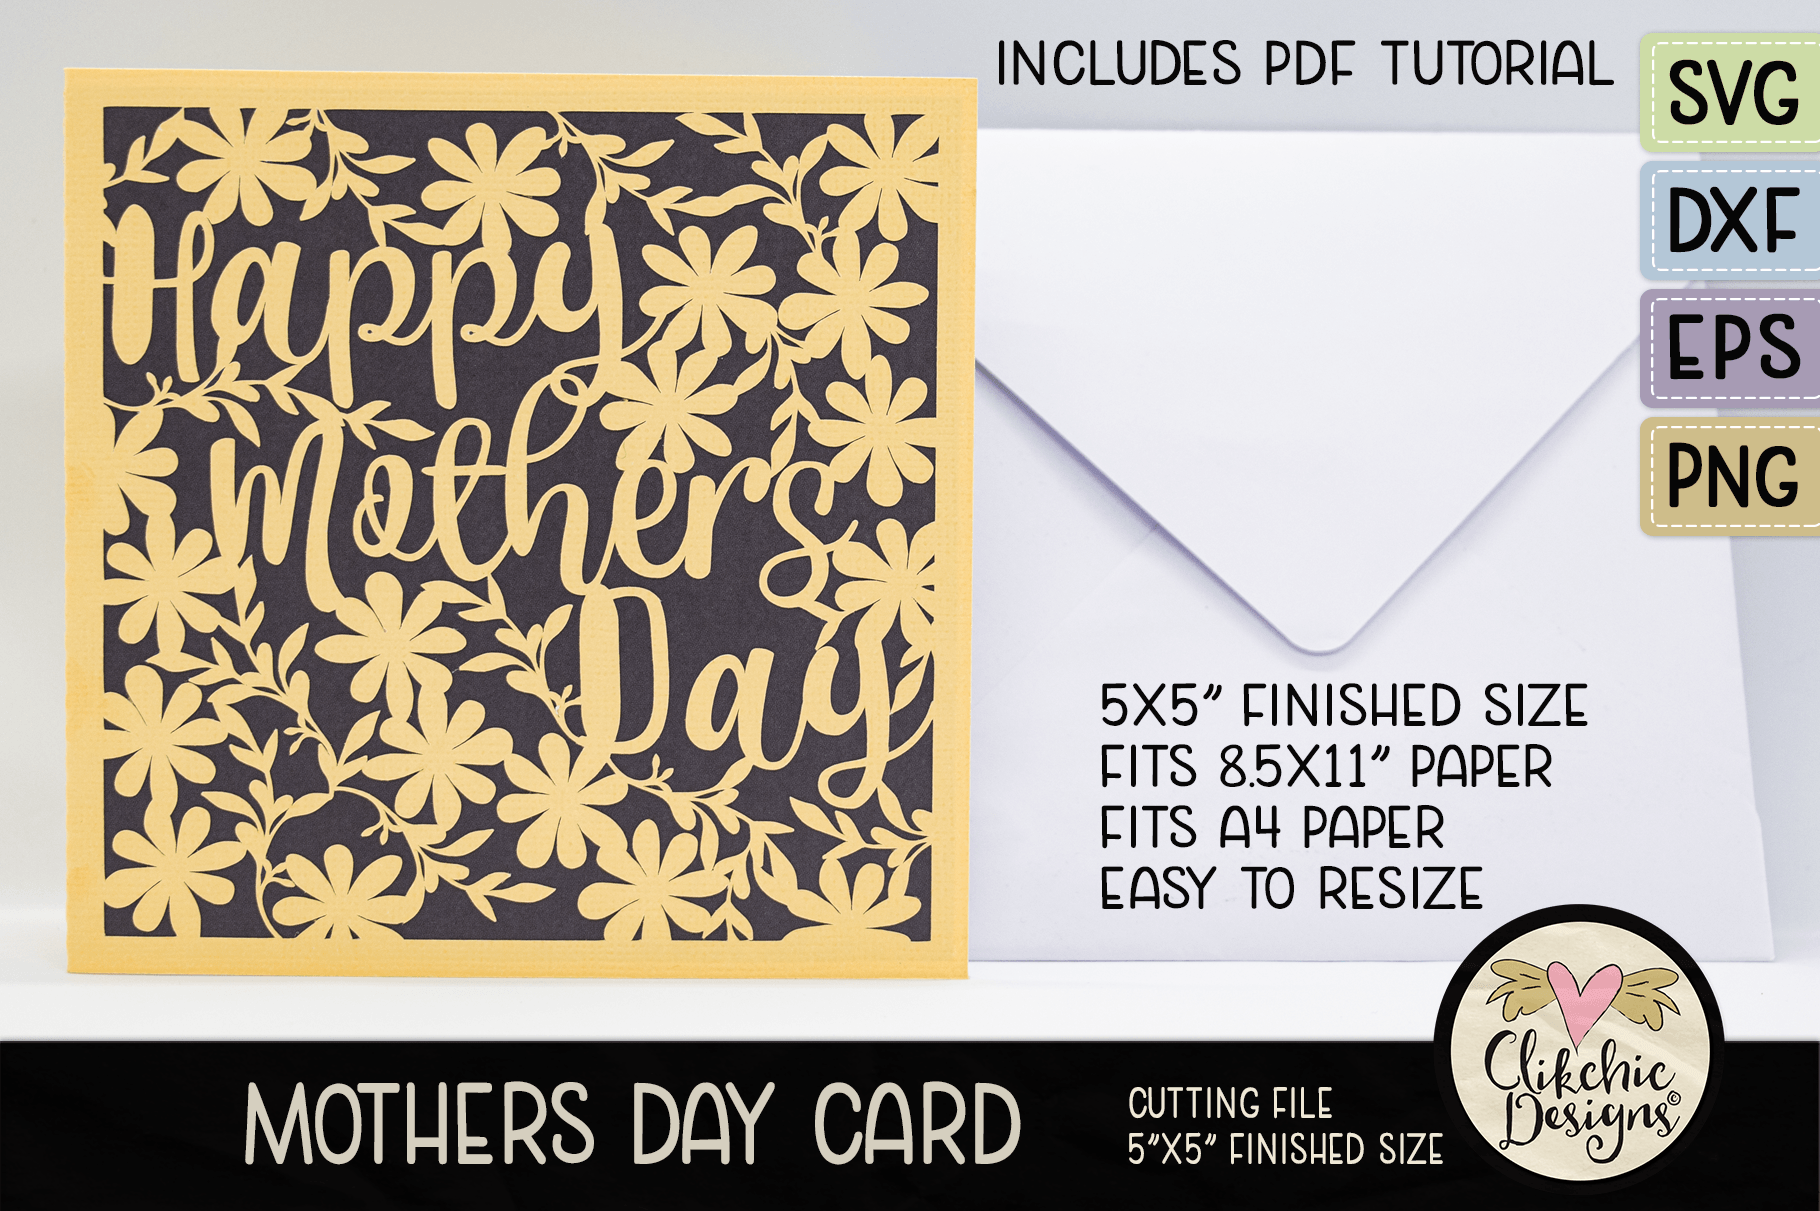 Download Mothers Day Card Svg Happy Mothers Day Card Cutting File By Clikchic Designs Thehungryjpeg Com